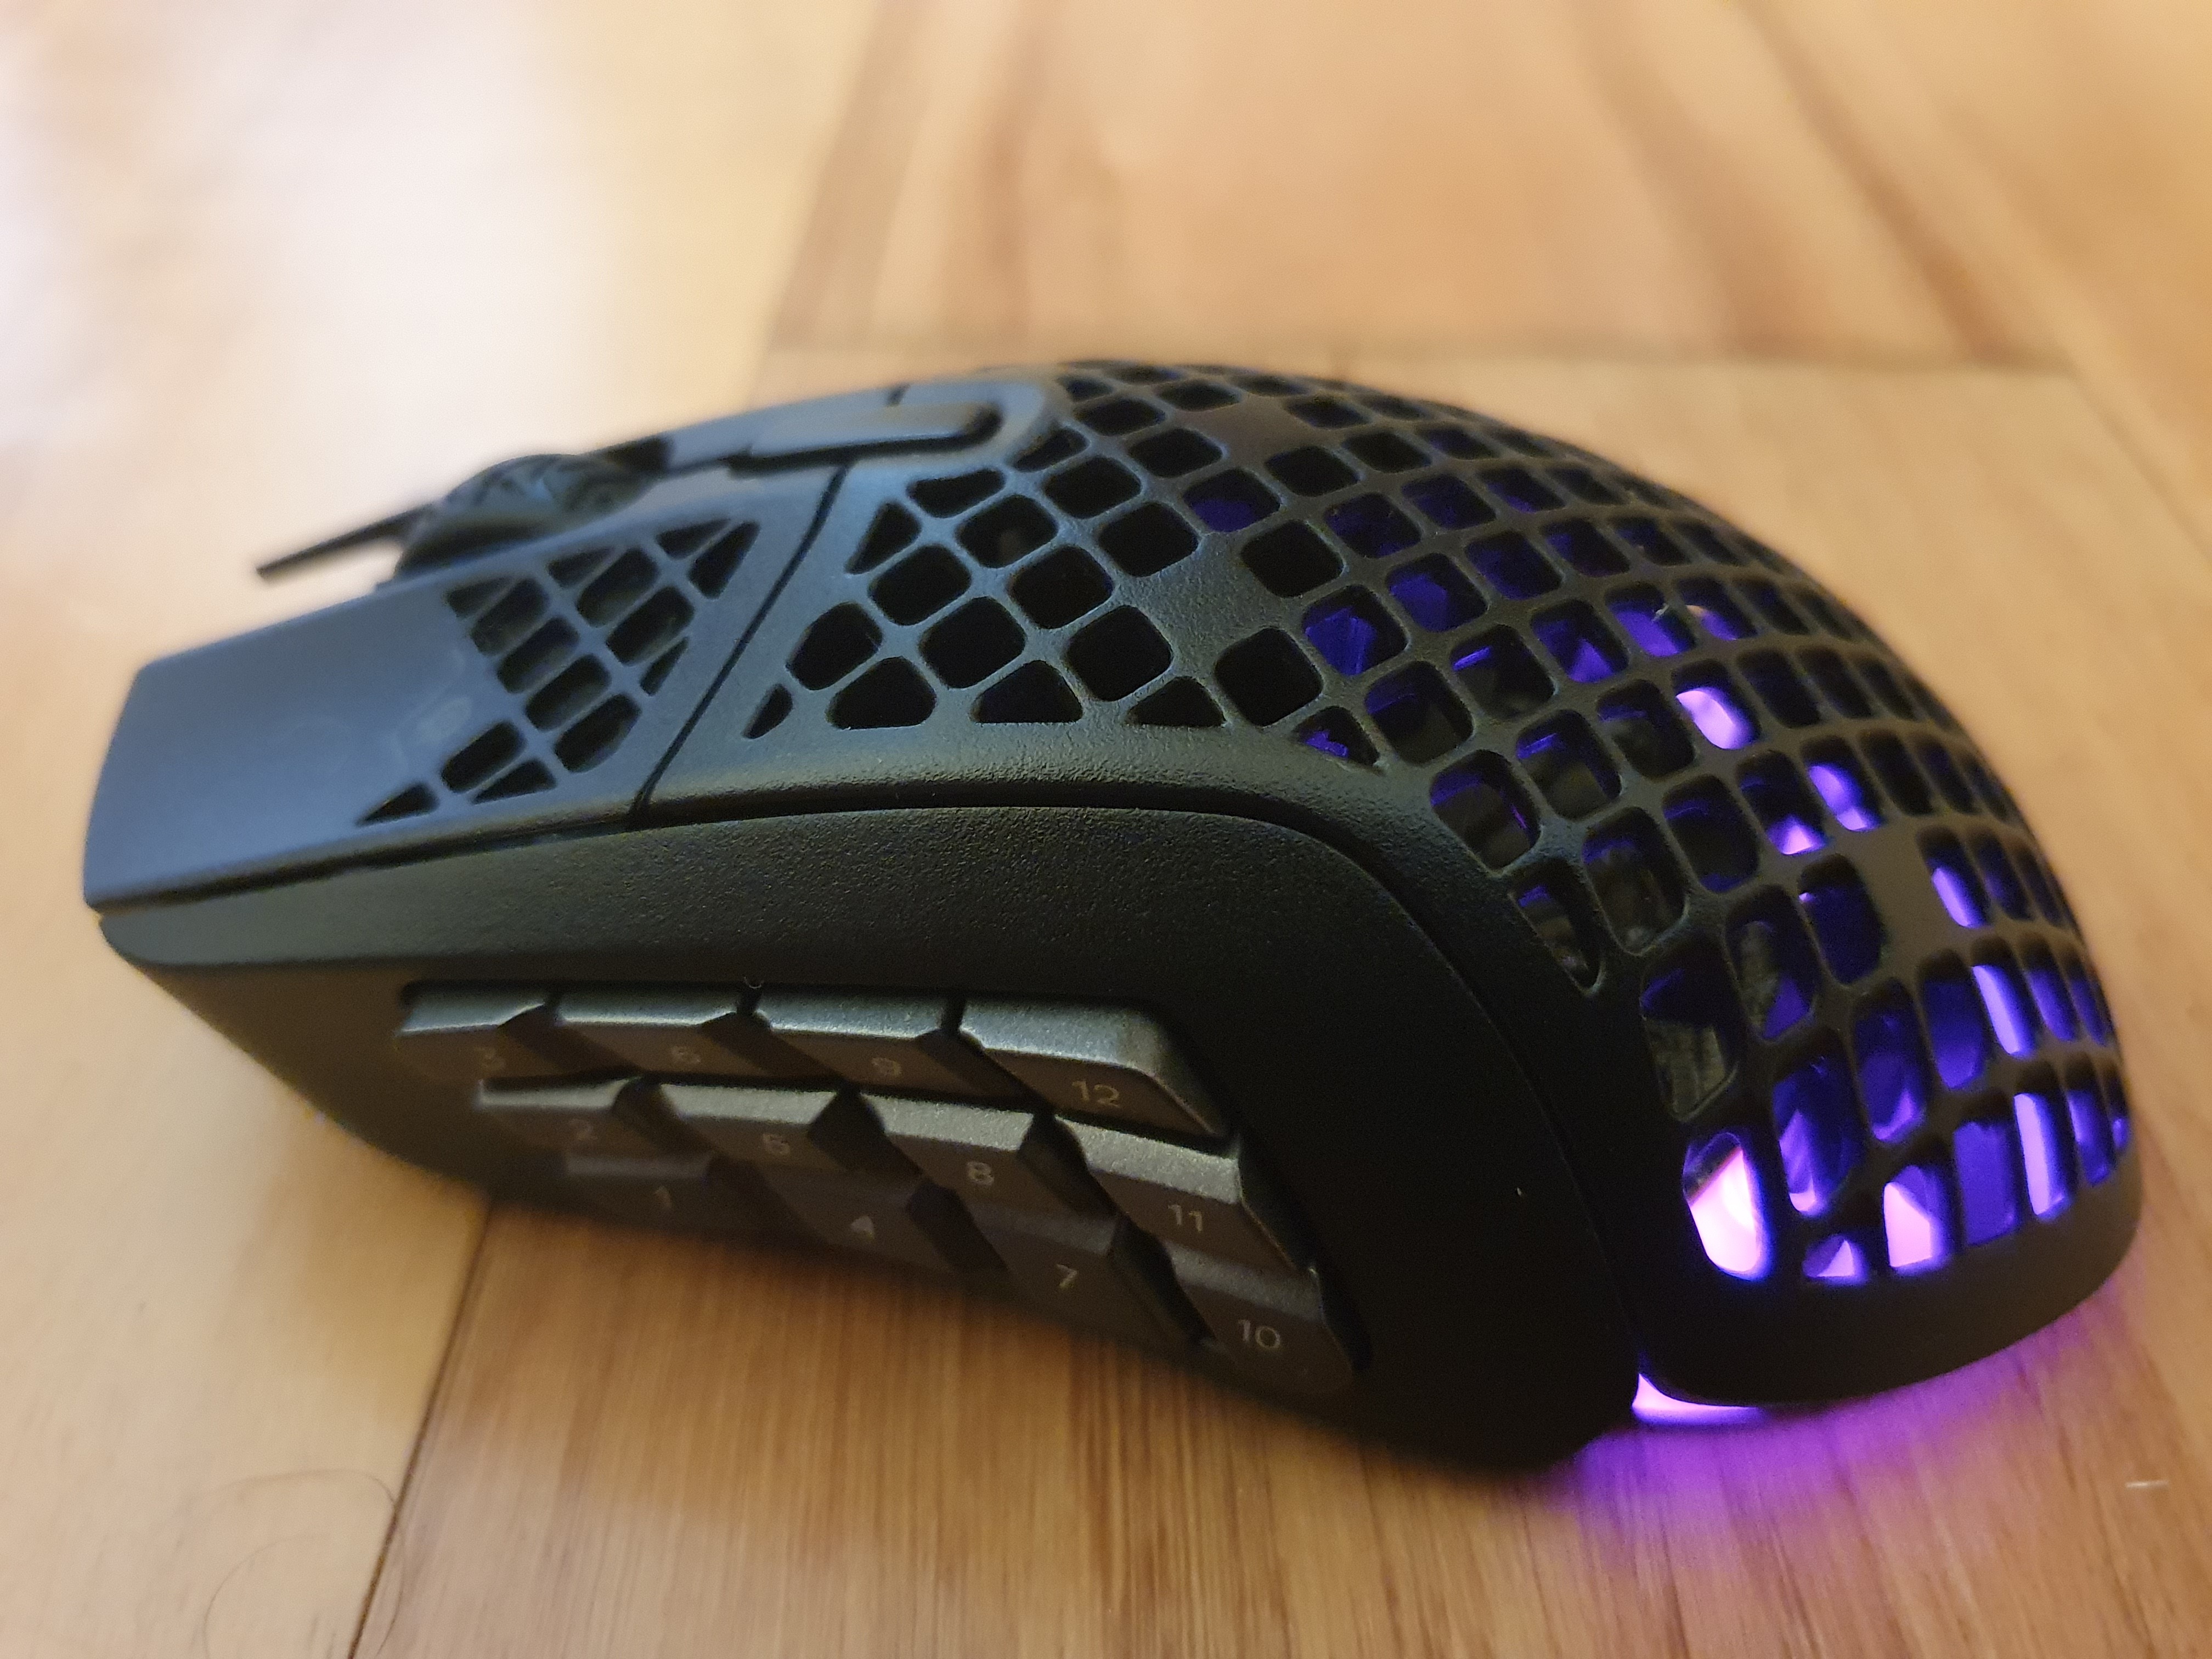 SteelSeries Aerox 9 - Best for tinkerers